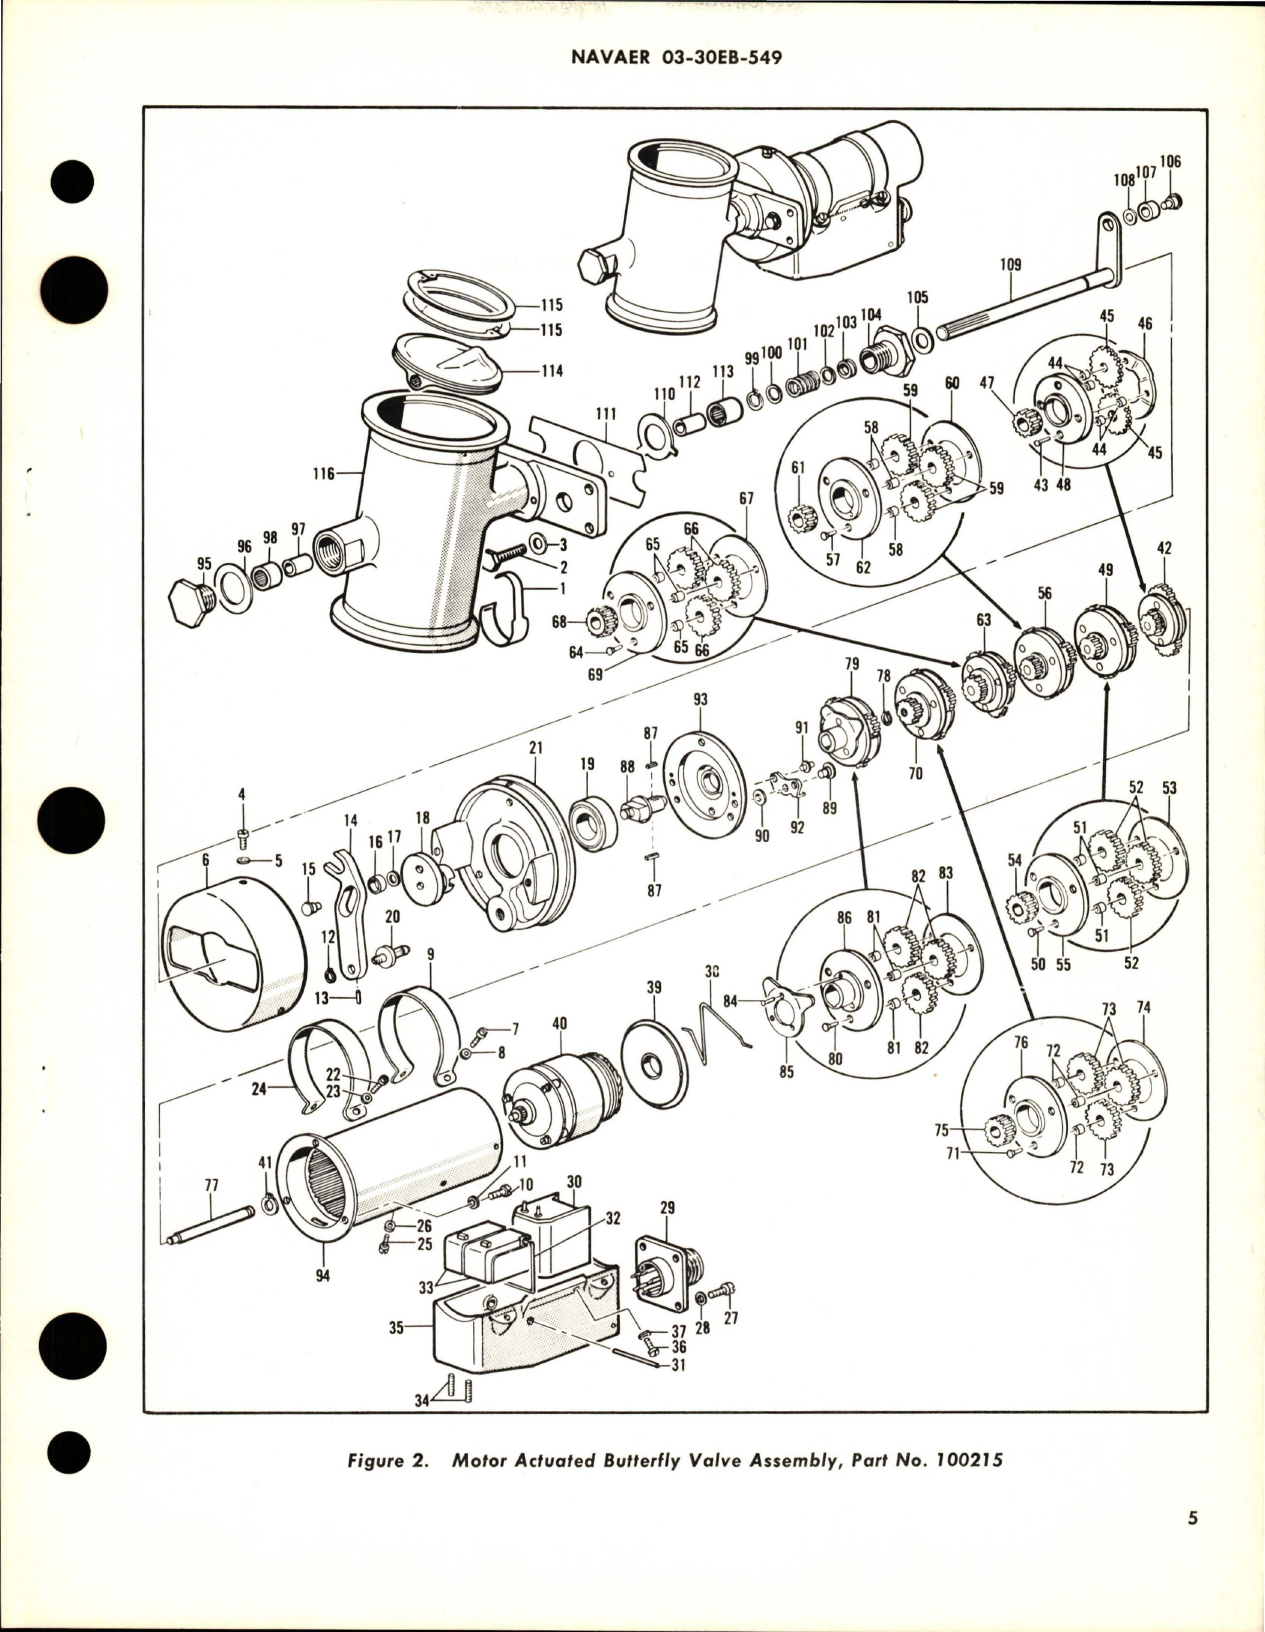 Sample page 5 from AirCorps Library document: Overhaul Instructions with Parts for Motor Actuated Butterfly Valve Assembly - Part 100215